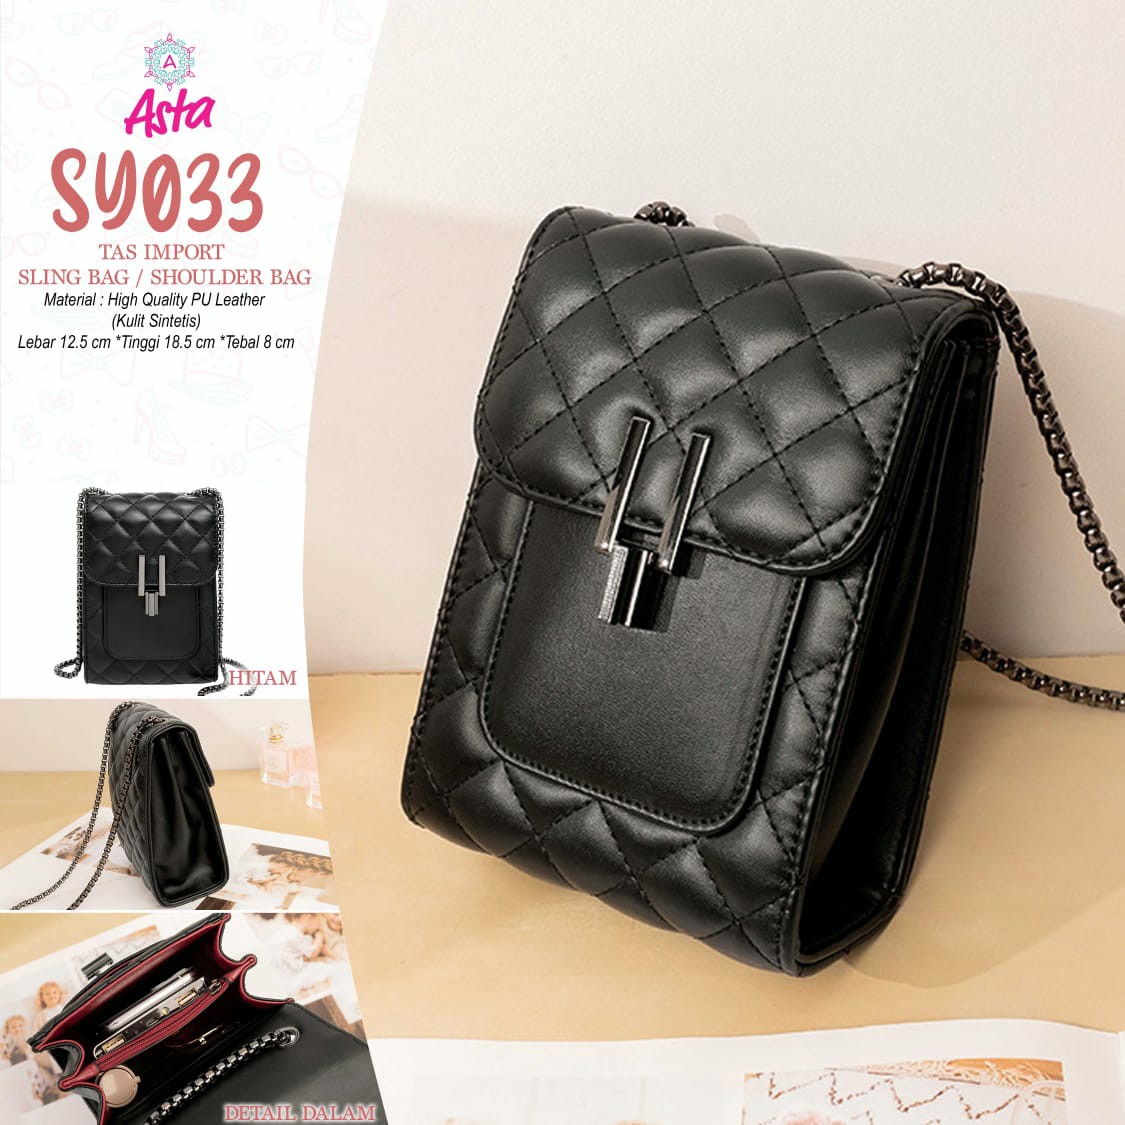 BAG IMPORT SY033